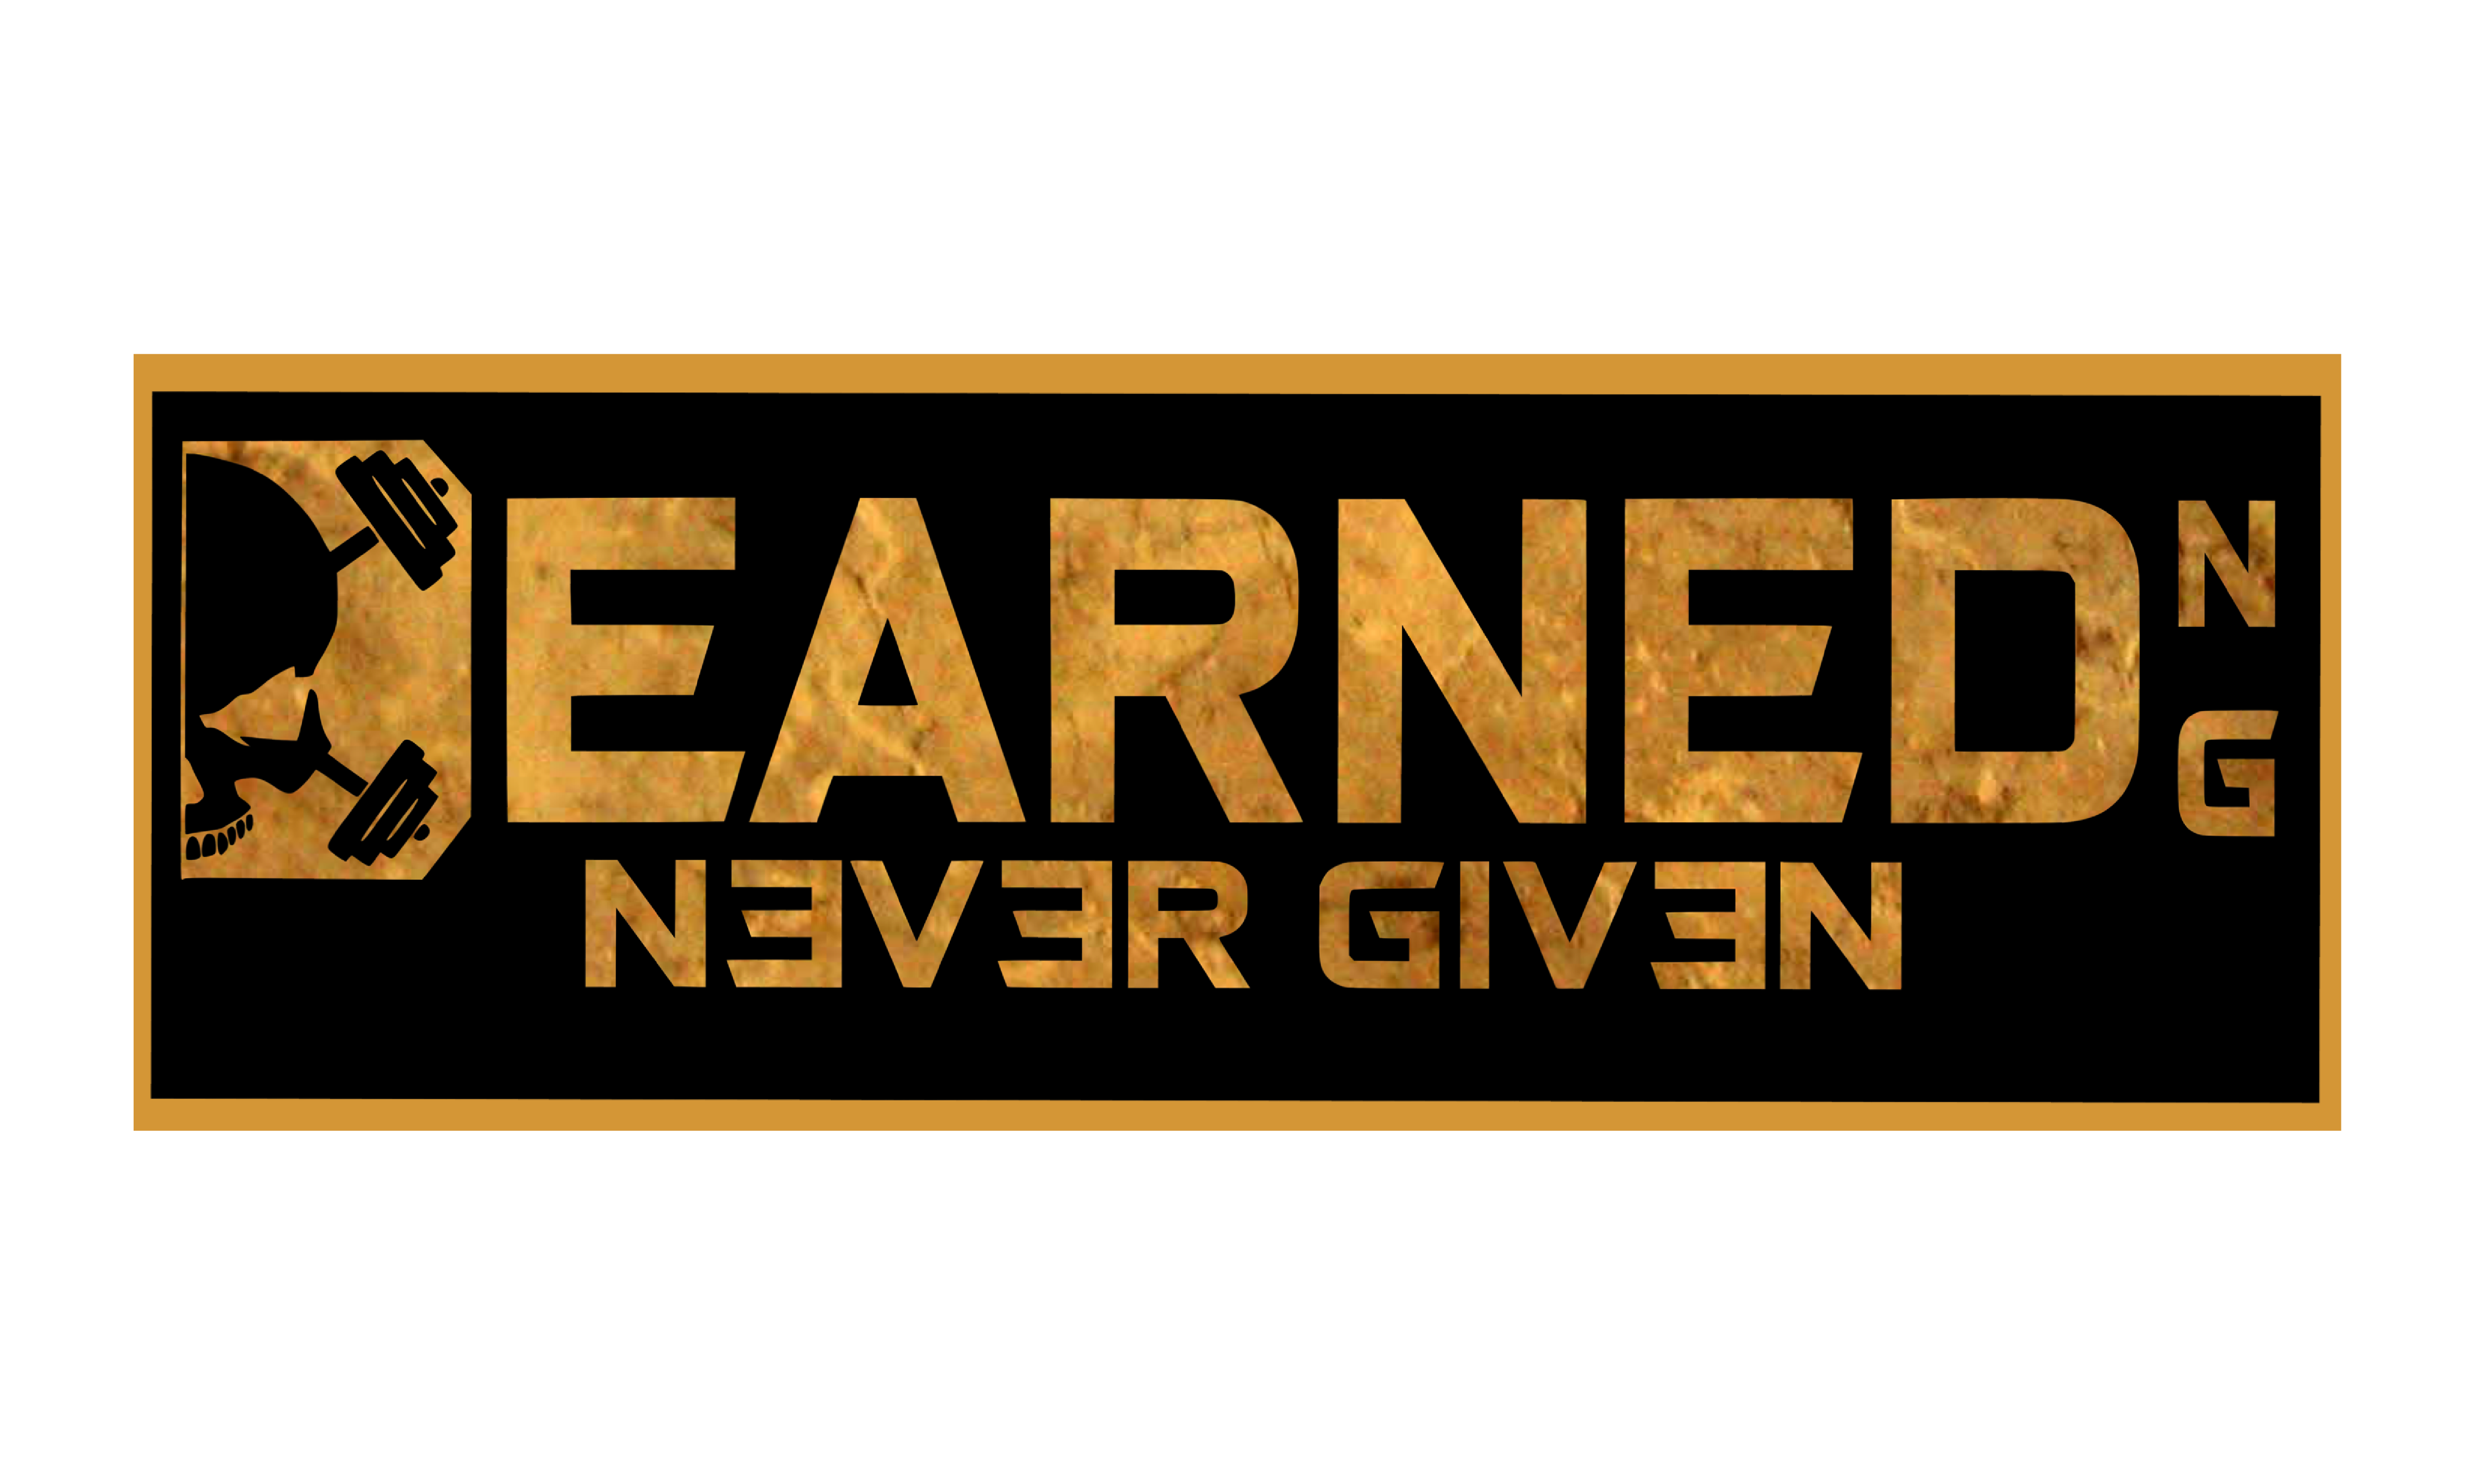 EARNED NEVER GIVEN